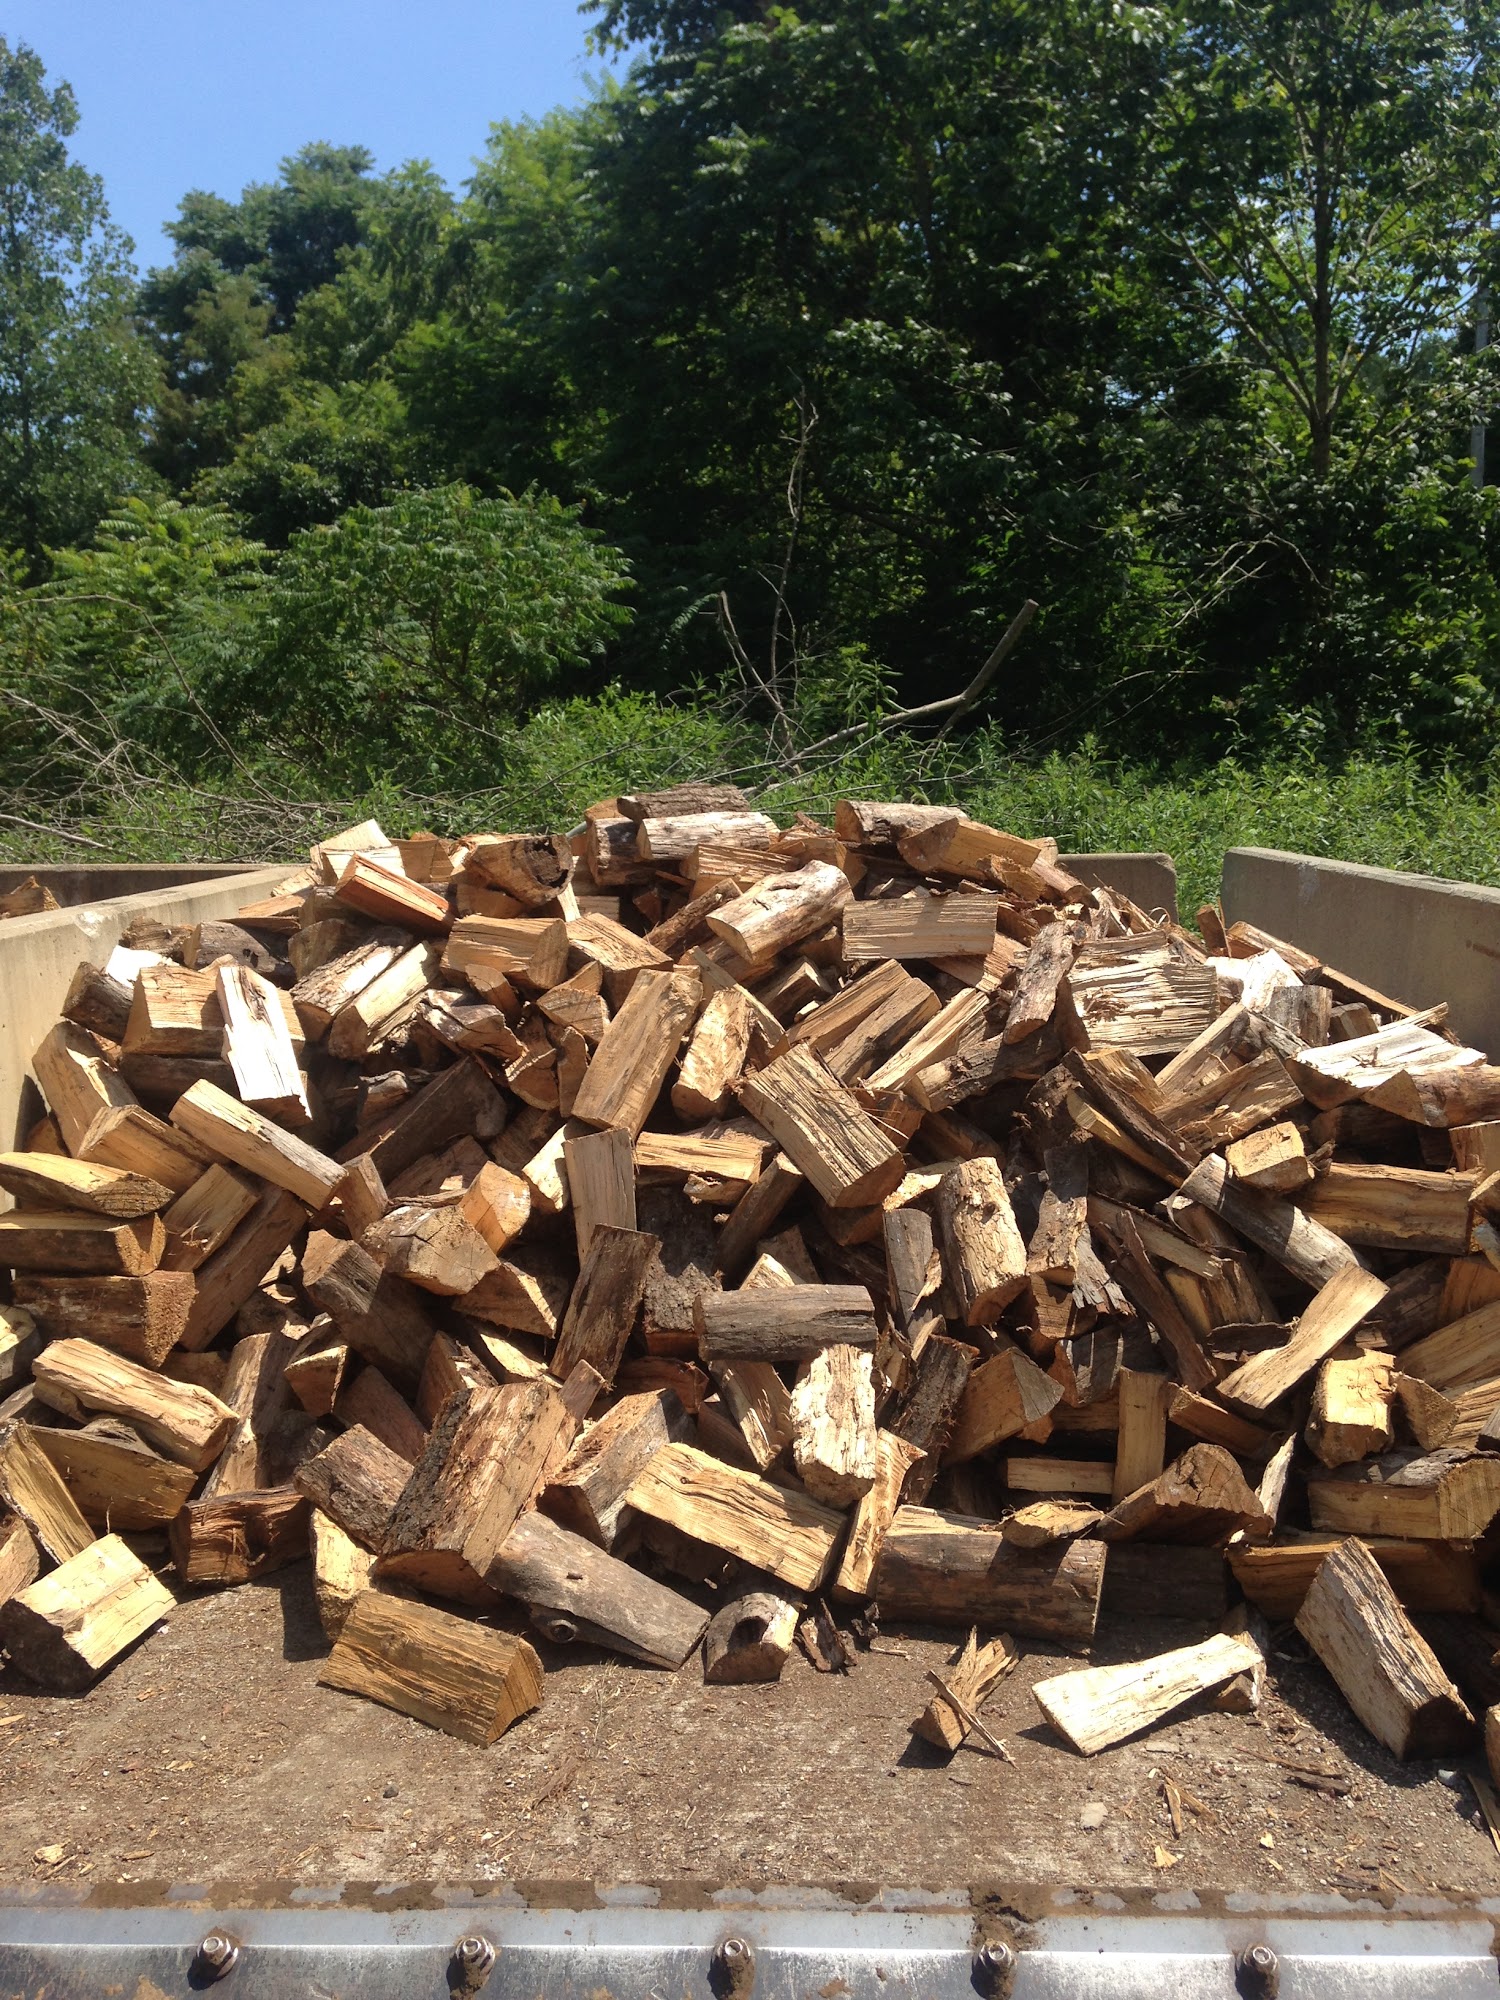 Ohio Valley Timber Products 825 OH-339, Belpre Ohio 45714